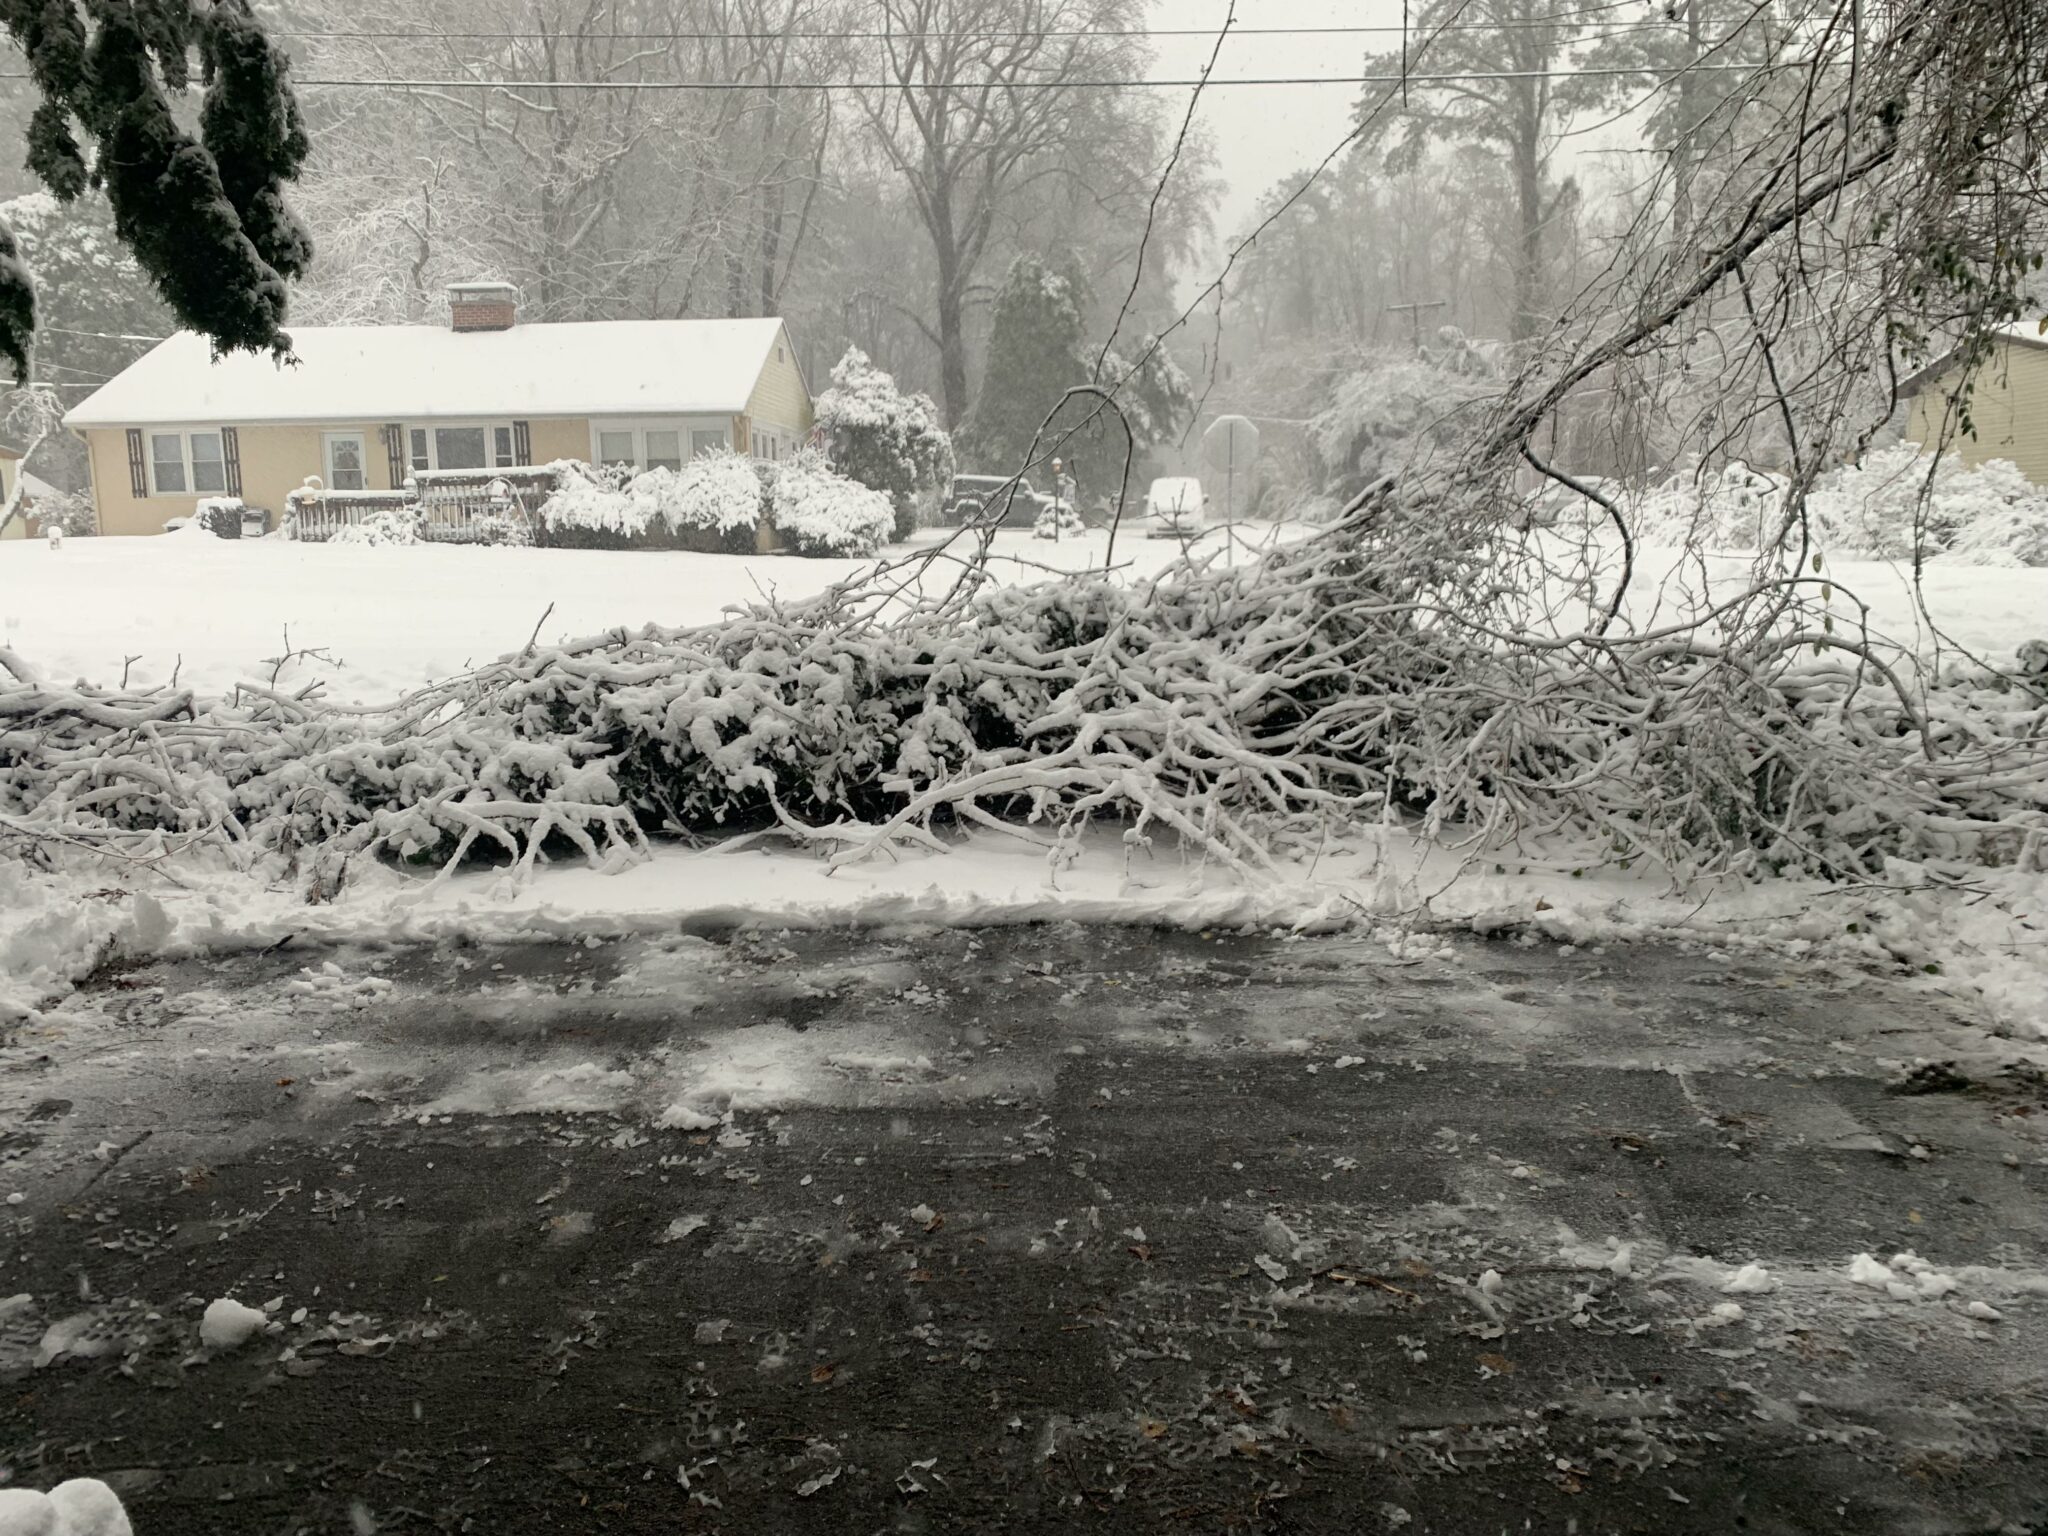 My boss sends me a text message and asks me to come in during a snowstorm. You expect me to chainsaw my way out of my driveway as part of my morning commute? Kick rocks.